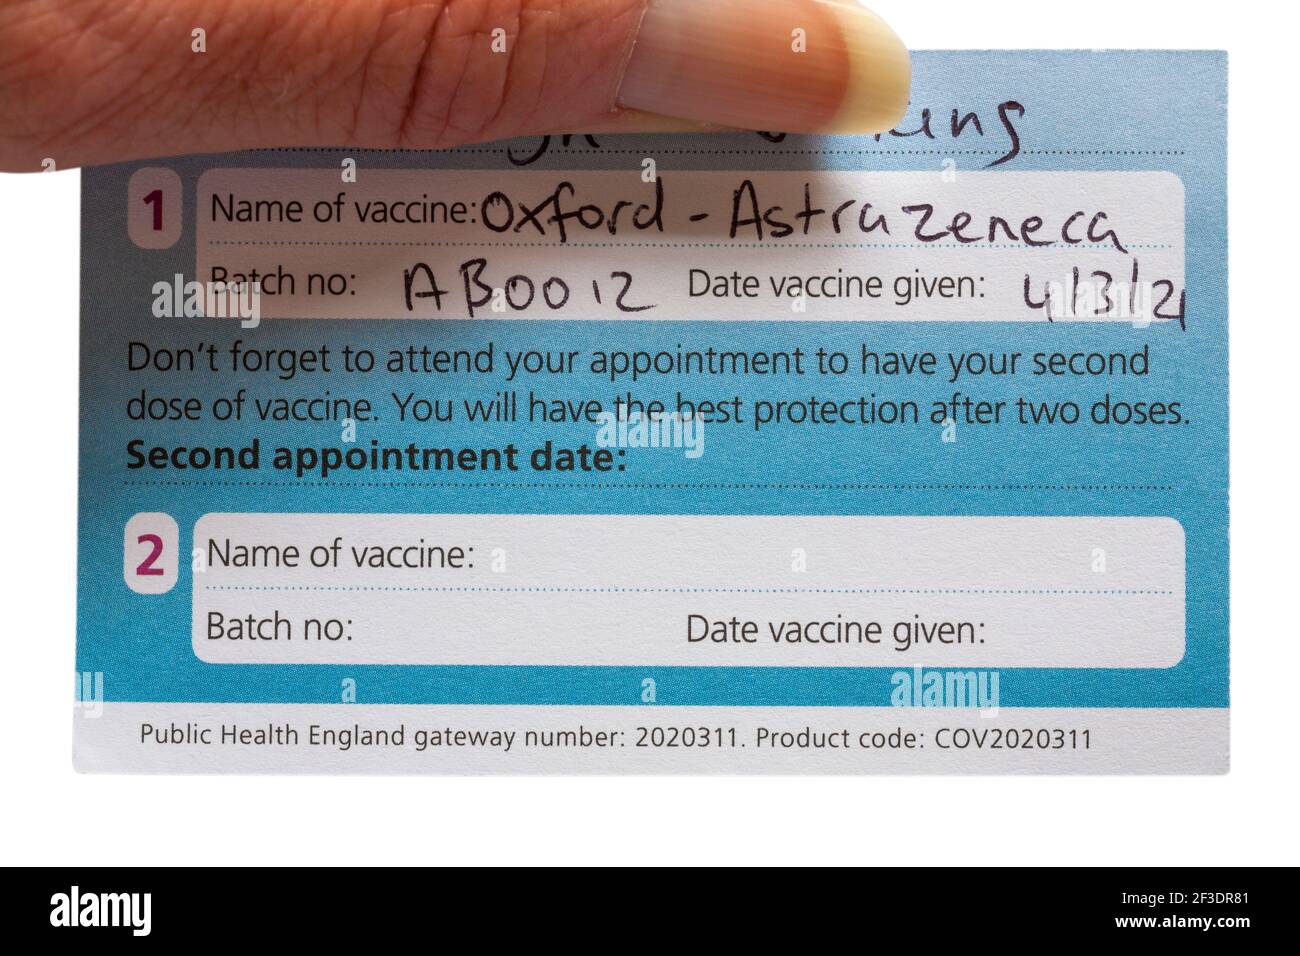 Covid-19 vaccination record card issued by NHS for Oxford AstraZeneca vaccine, Oxford Astra Zeneca vaccine Stock Photo